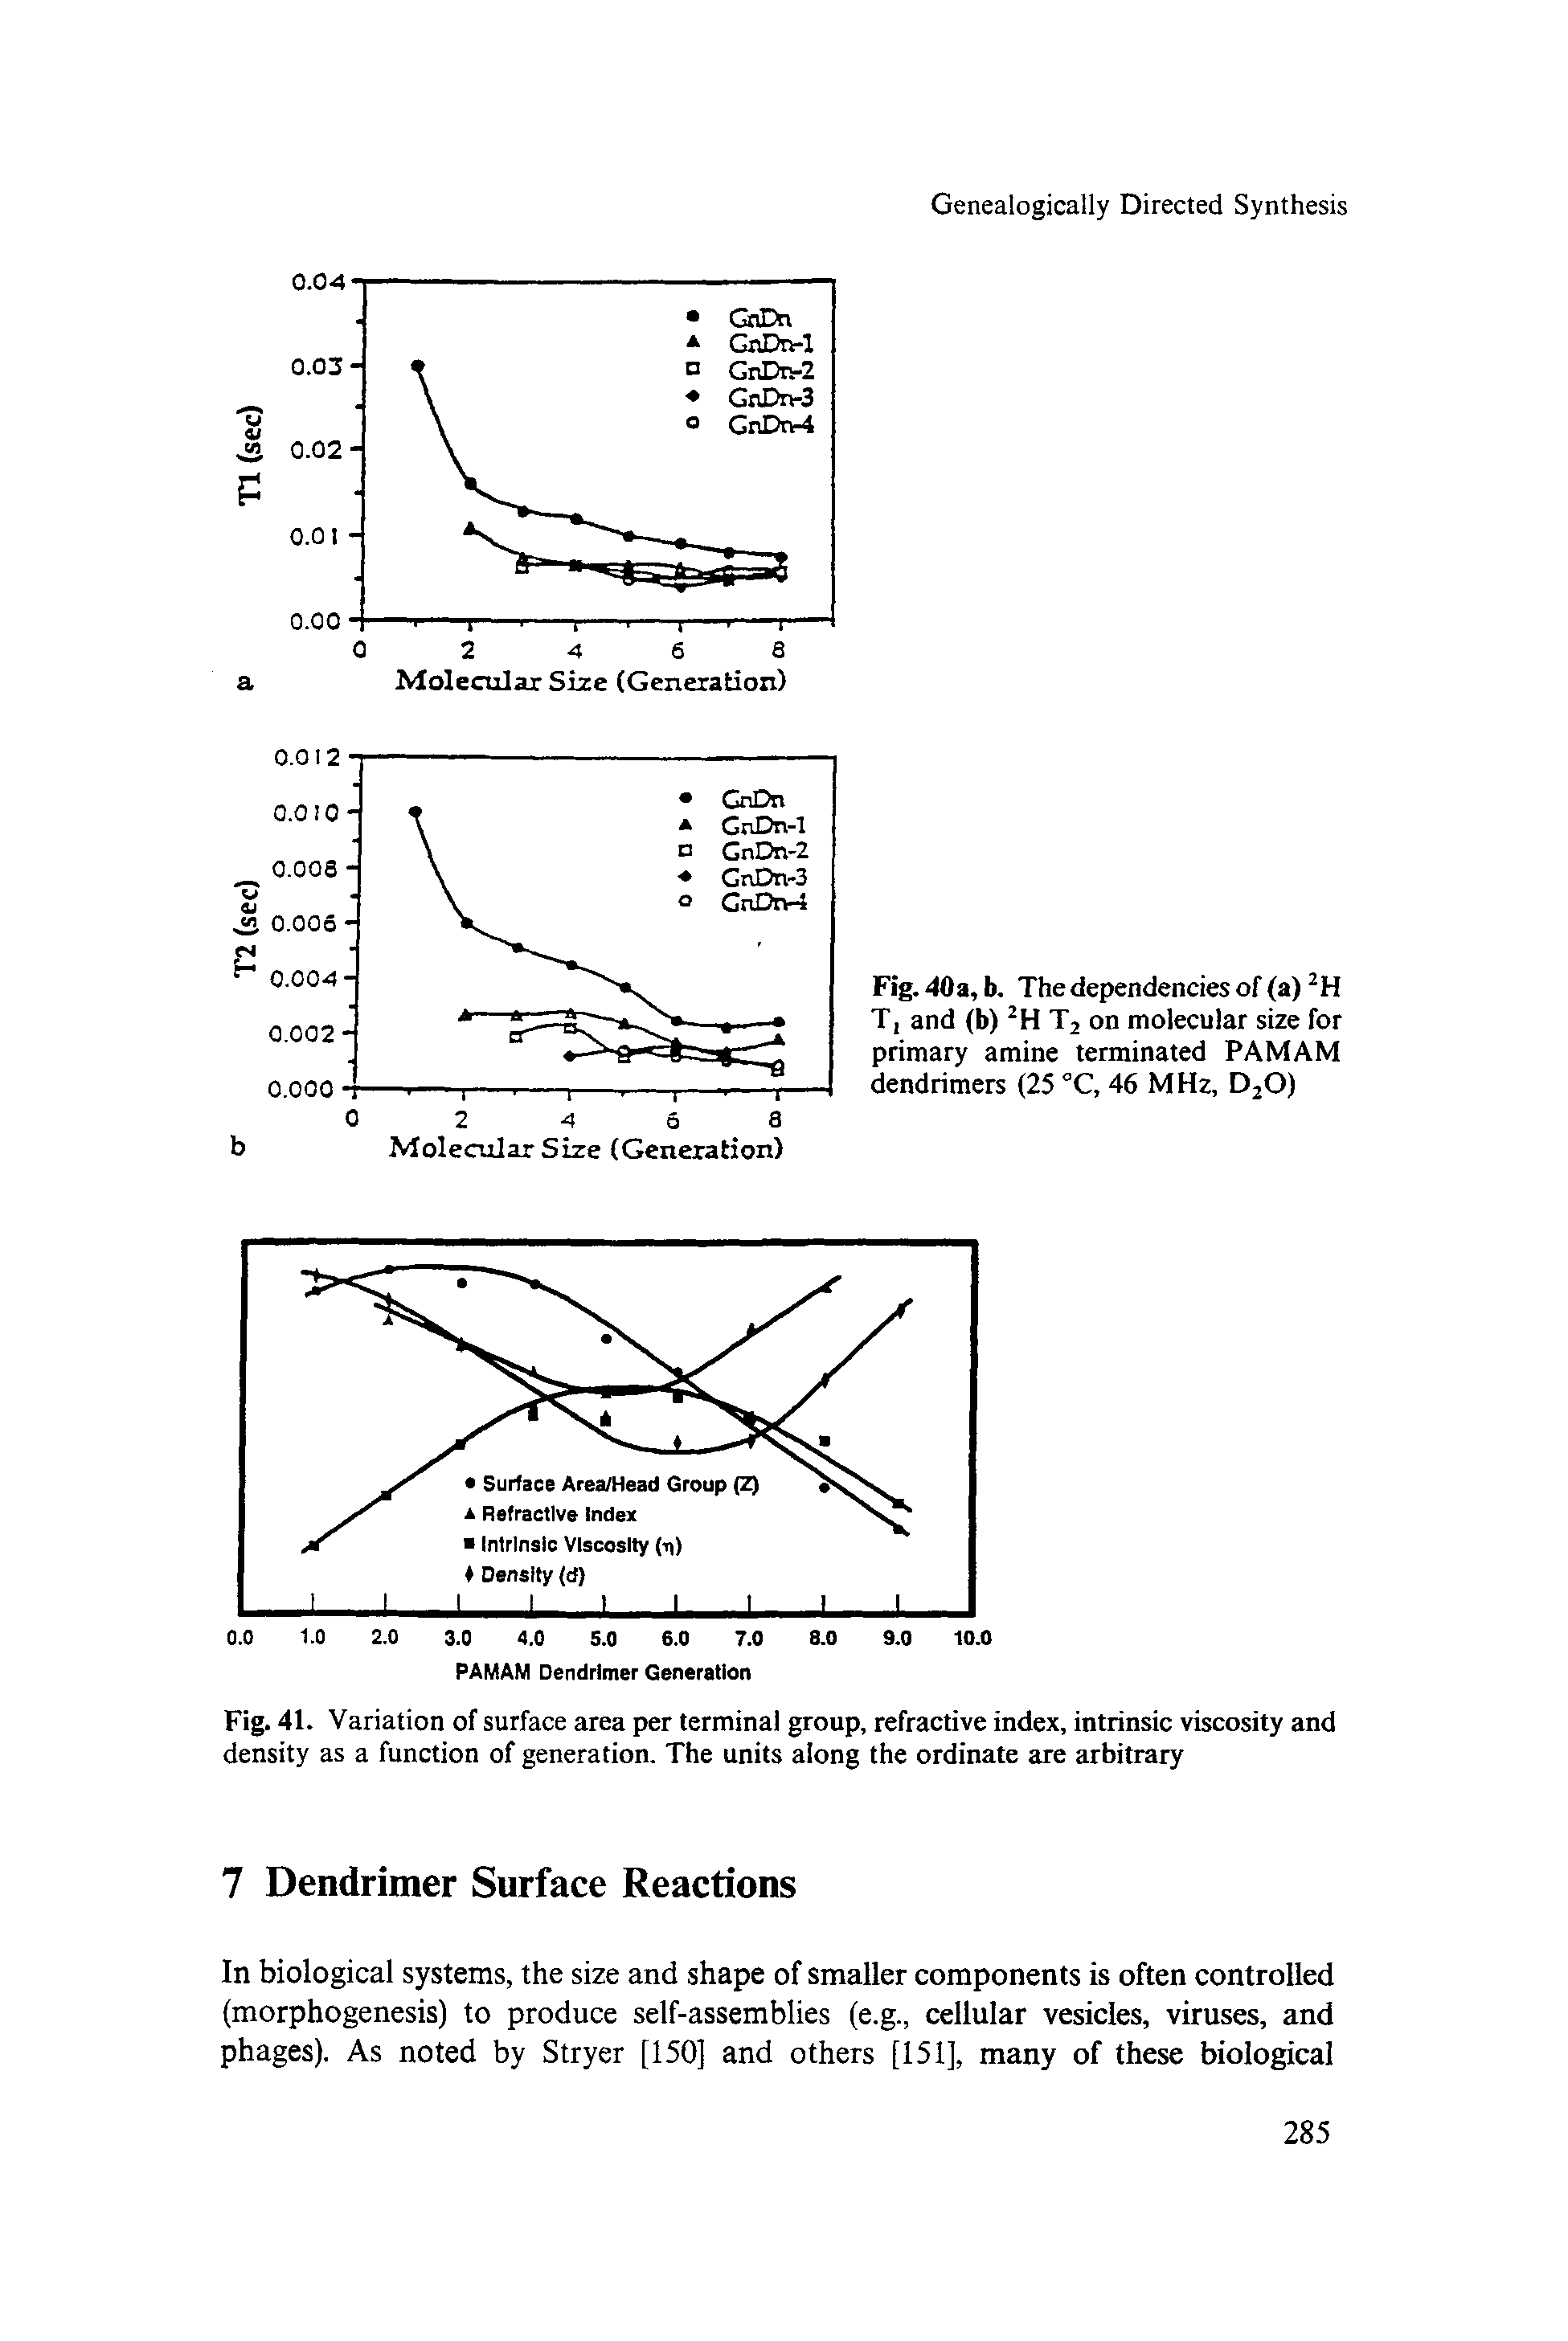 Fig. 41. Variation of surface area per terminal group, refractive index, intrinsic viscosity and density as a function of generation. The units along the ordinate are arbitrary...